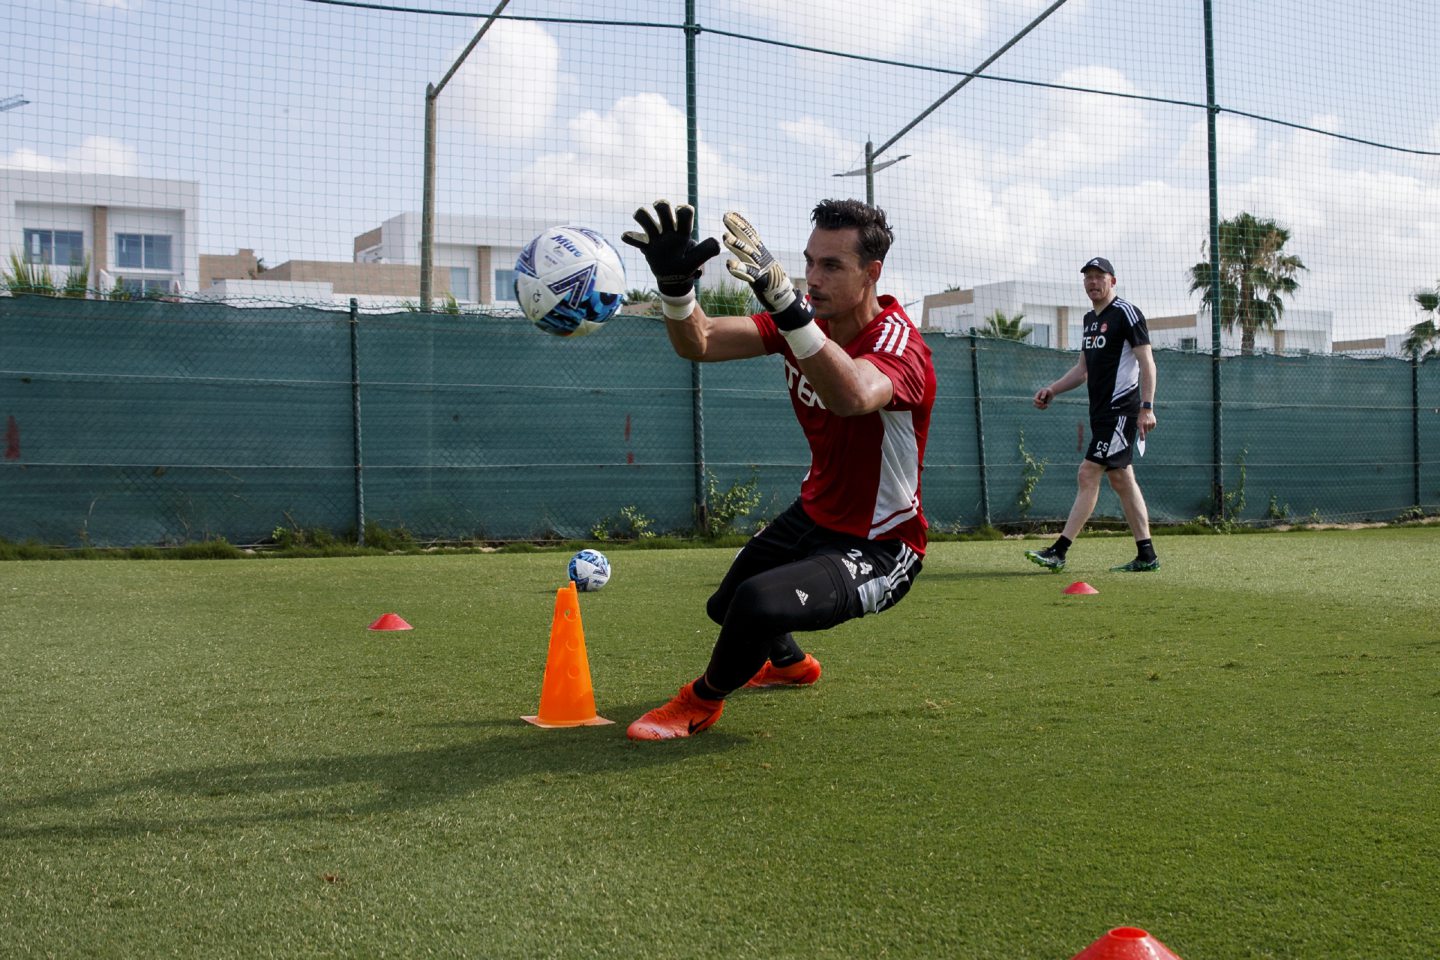 Keeper Kelle Roos dives to save during training in Spain.